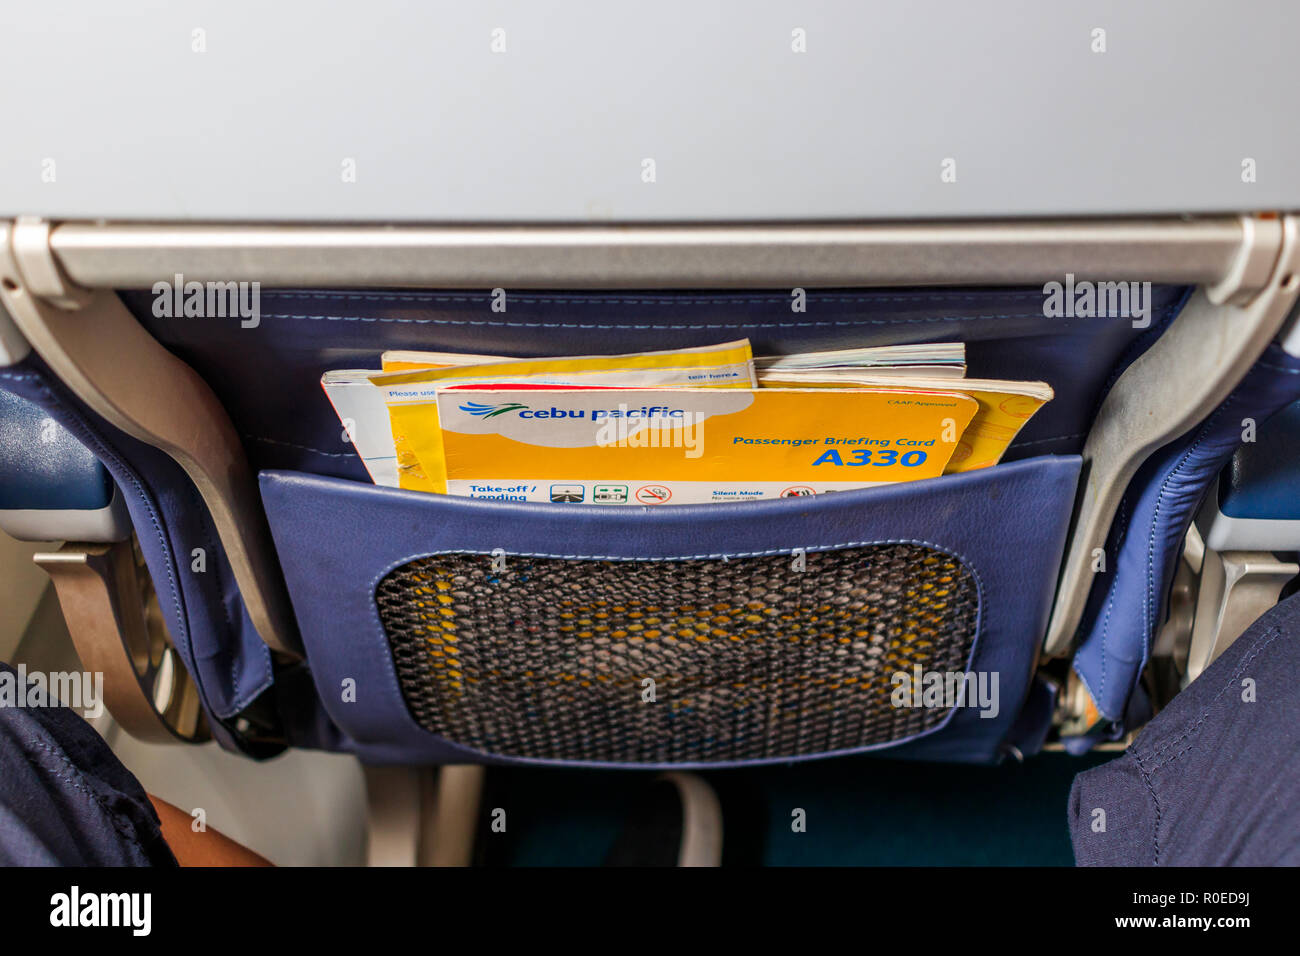 Seat Pocket Containing  Safety Card And Magazines Inside Cebu Pacific Plane Stock Photo